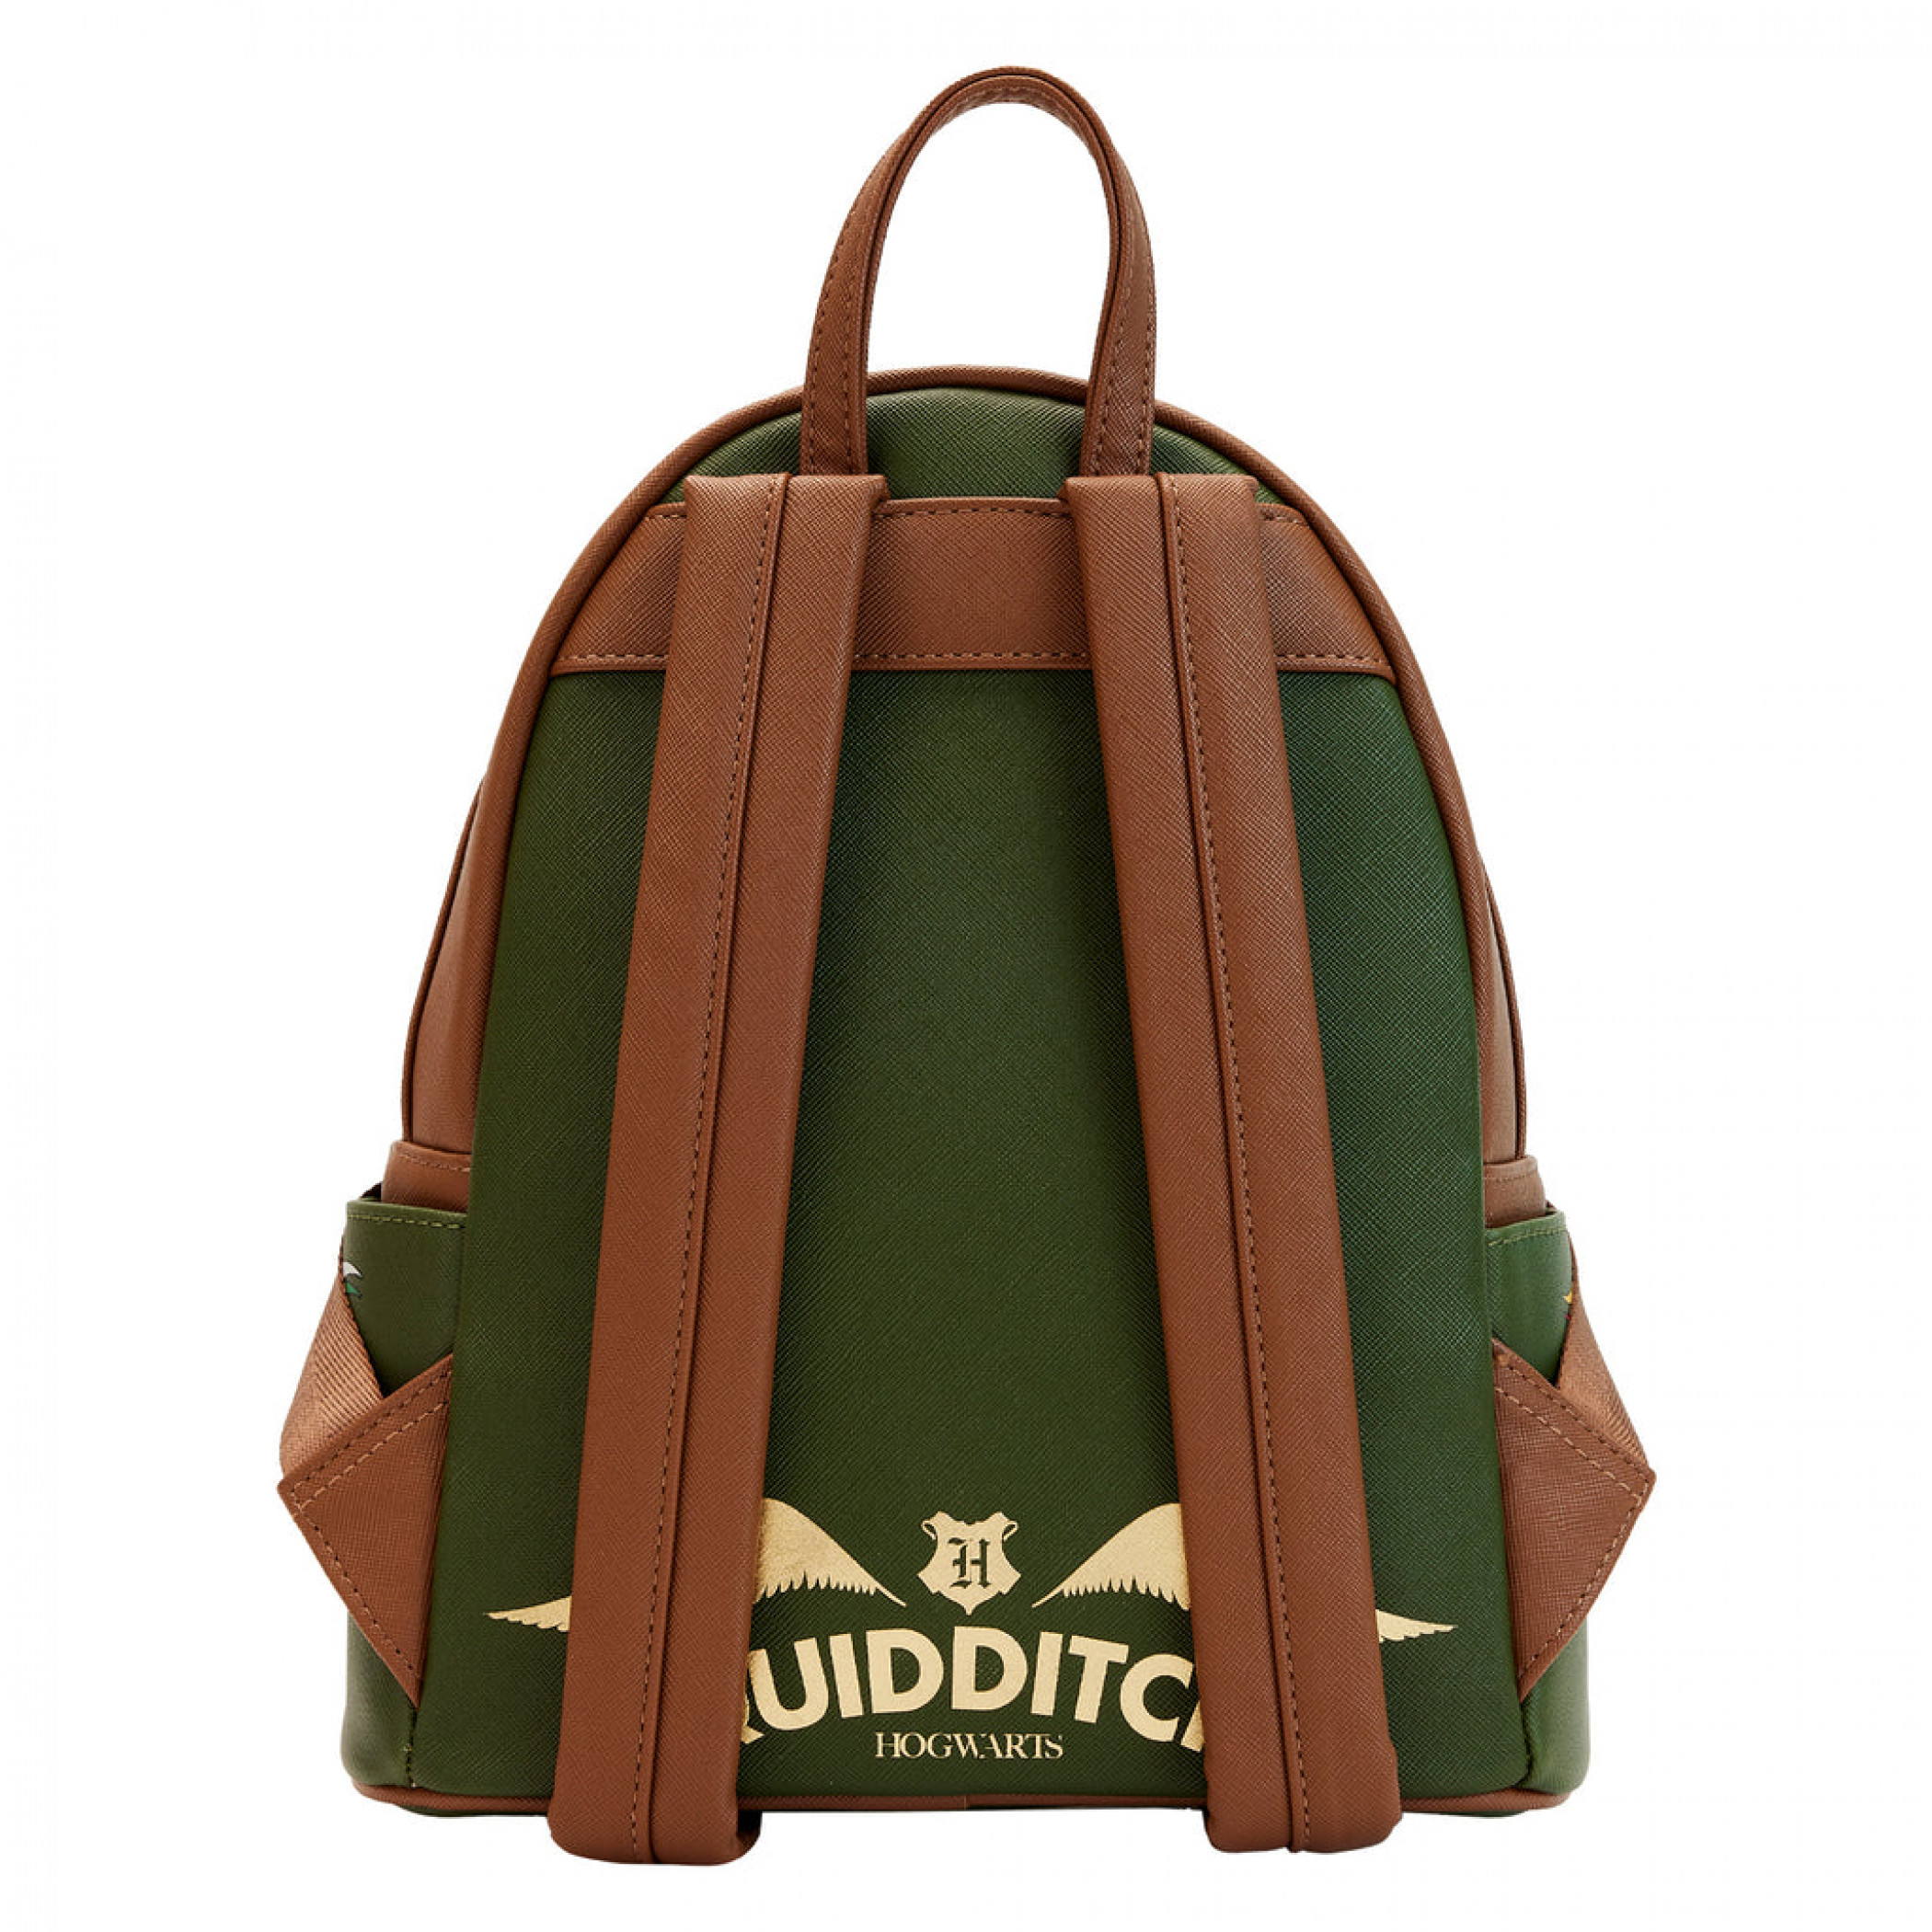 Harry Potter Quidditch Mini Backpack with Moving Wings